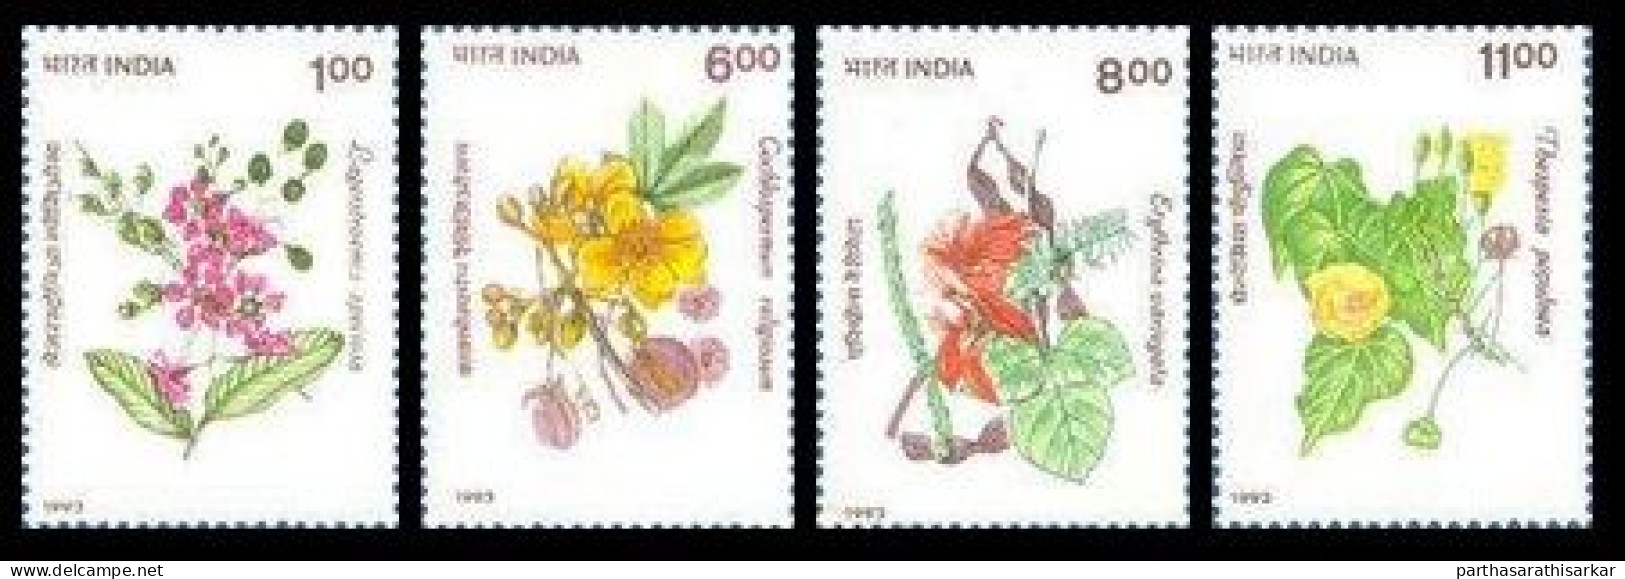 INDIA 1993 FLOWERING TREES NATURE COMPLETE SET MNH - Ungebraucht